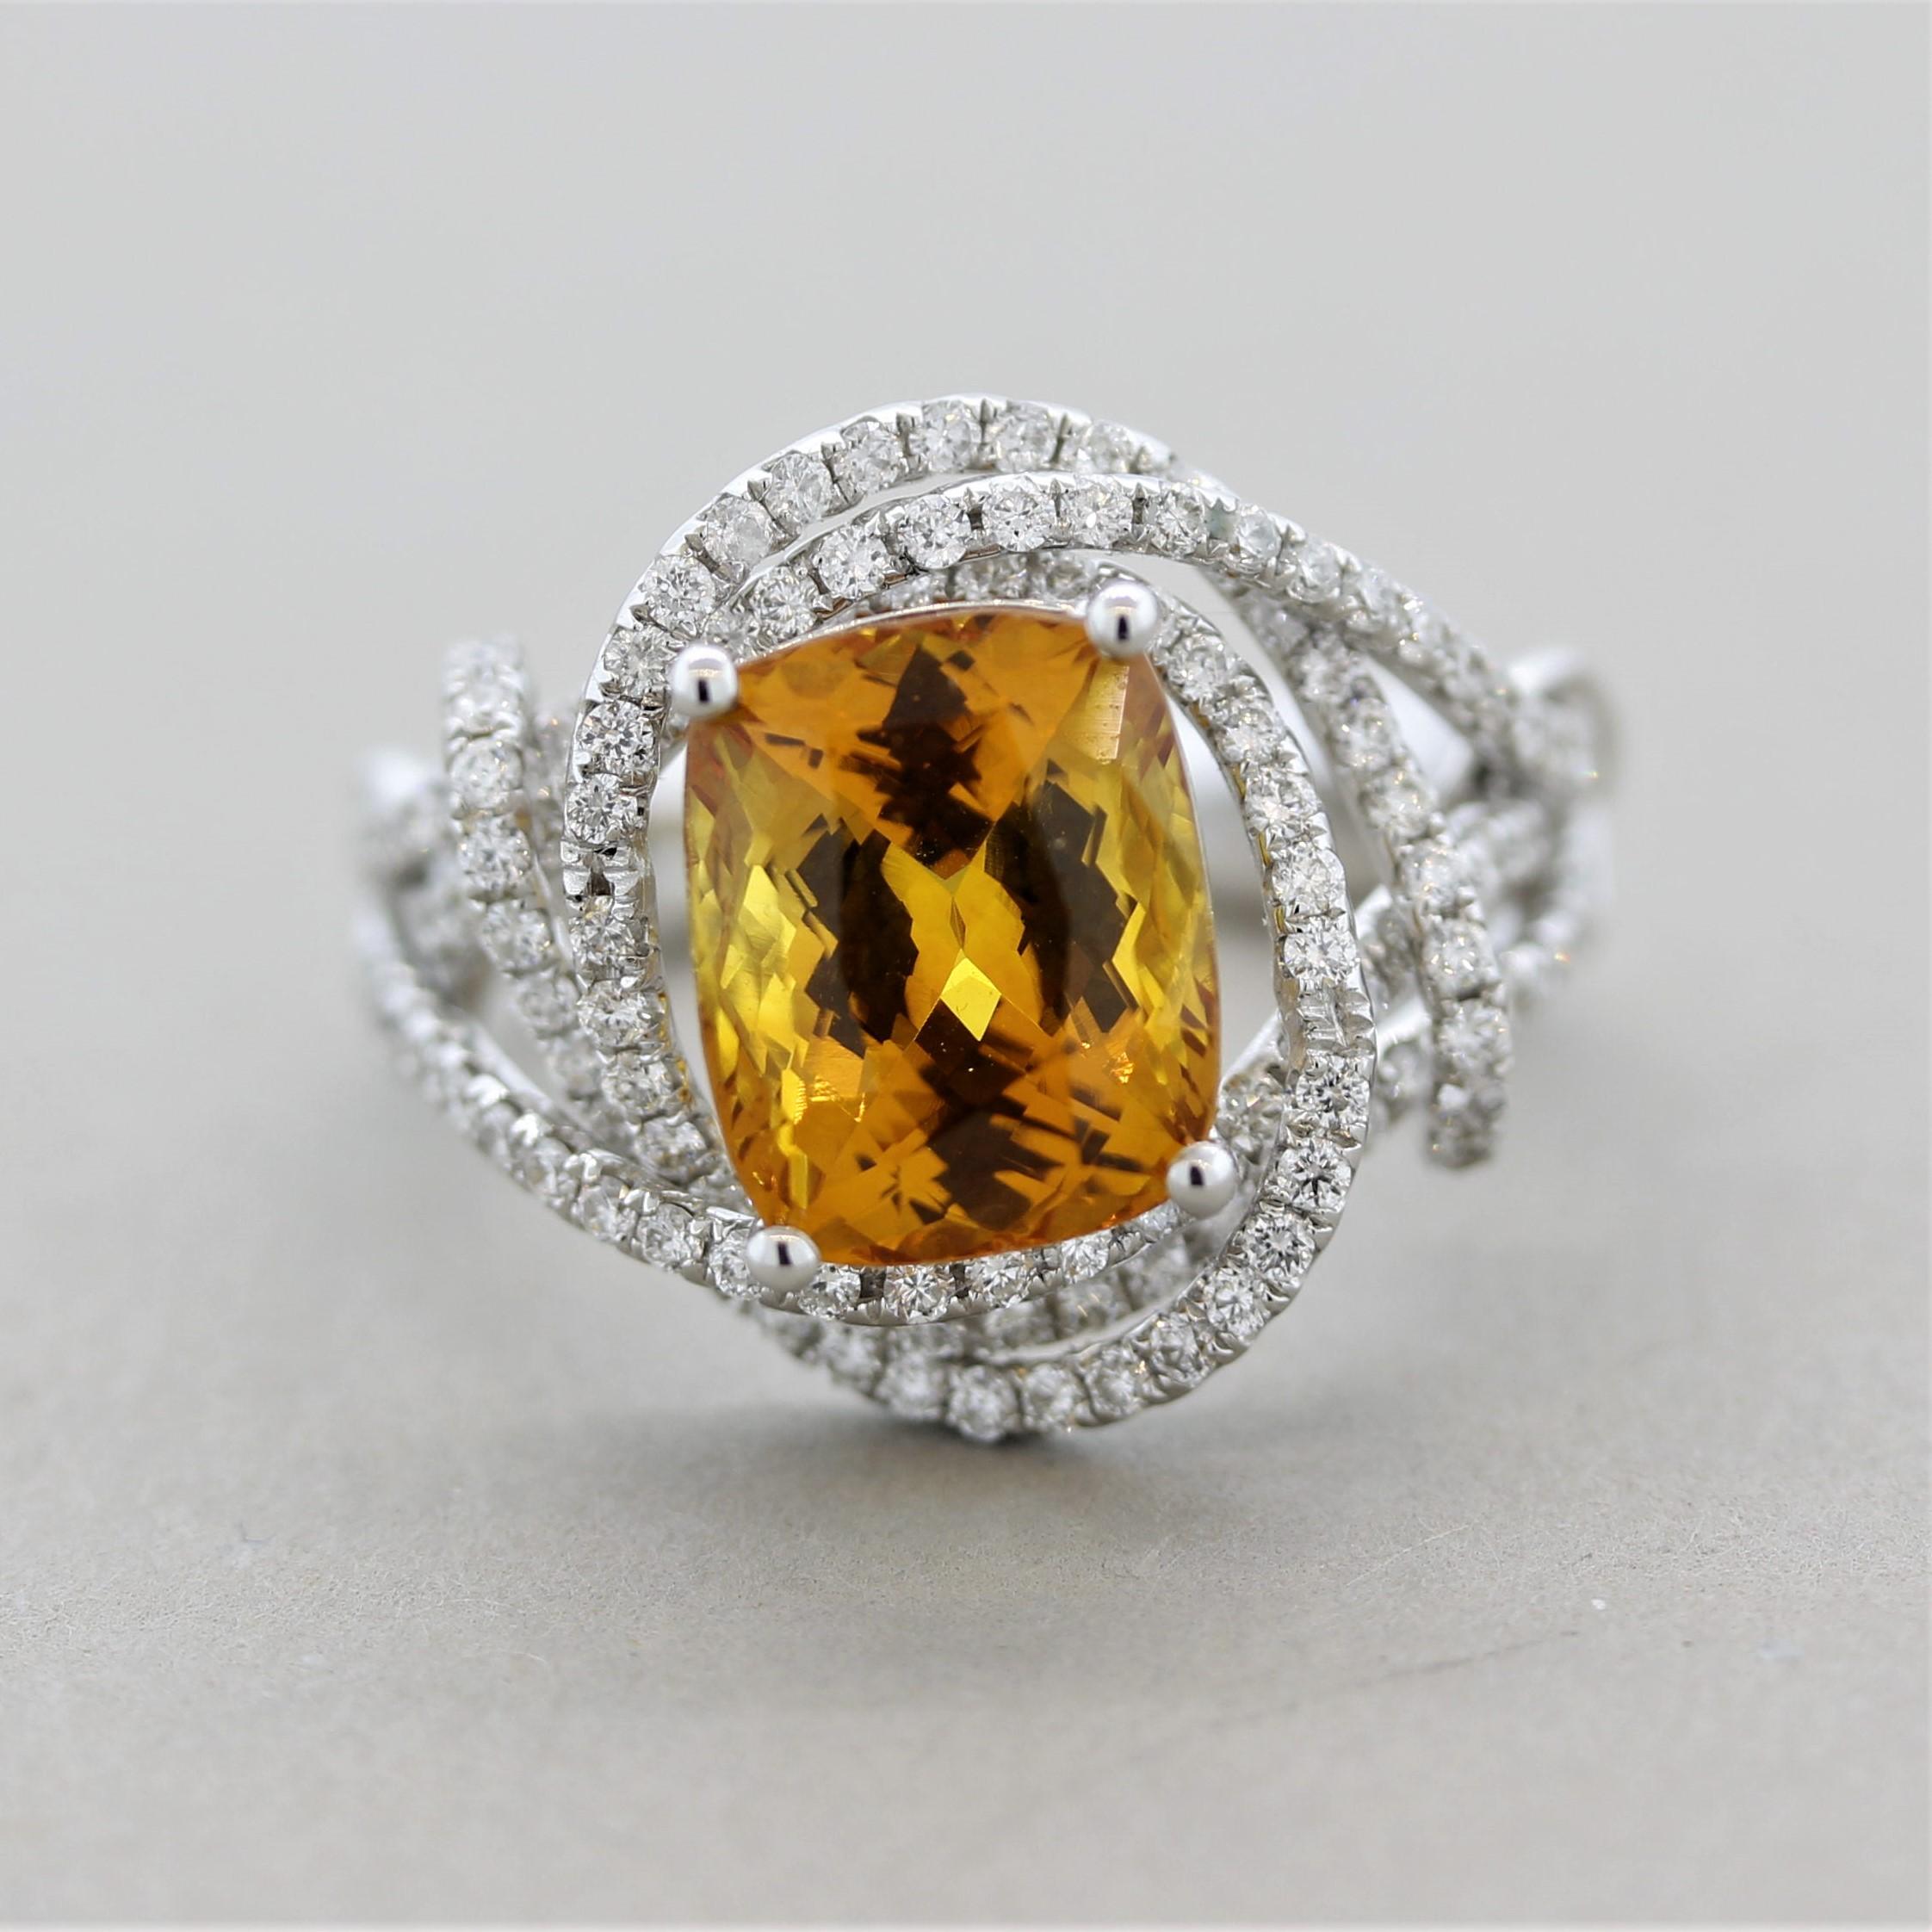 A brilliant ring featuring a GIA certified natural yellowish-orange sapphire! It weighs 4.84 carats and is free of any eye-visible inclusions allowing the stones natural brilliance and bright color to shine! It is shaped as a cushion and is accented